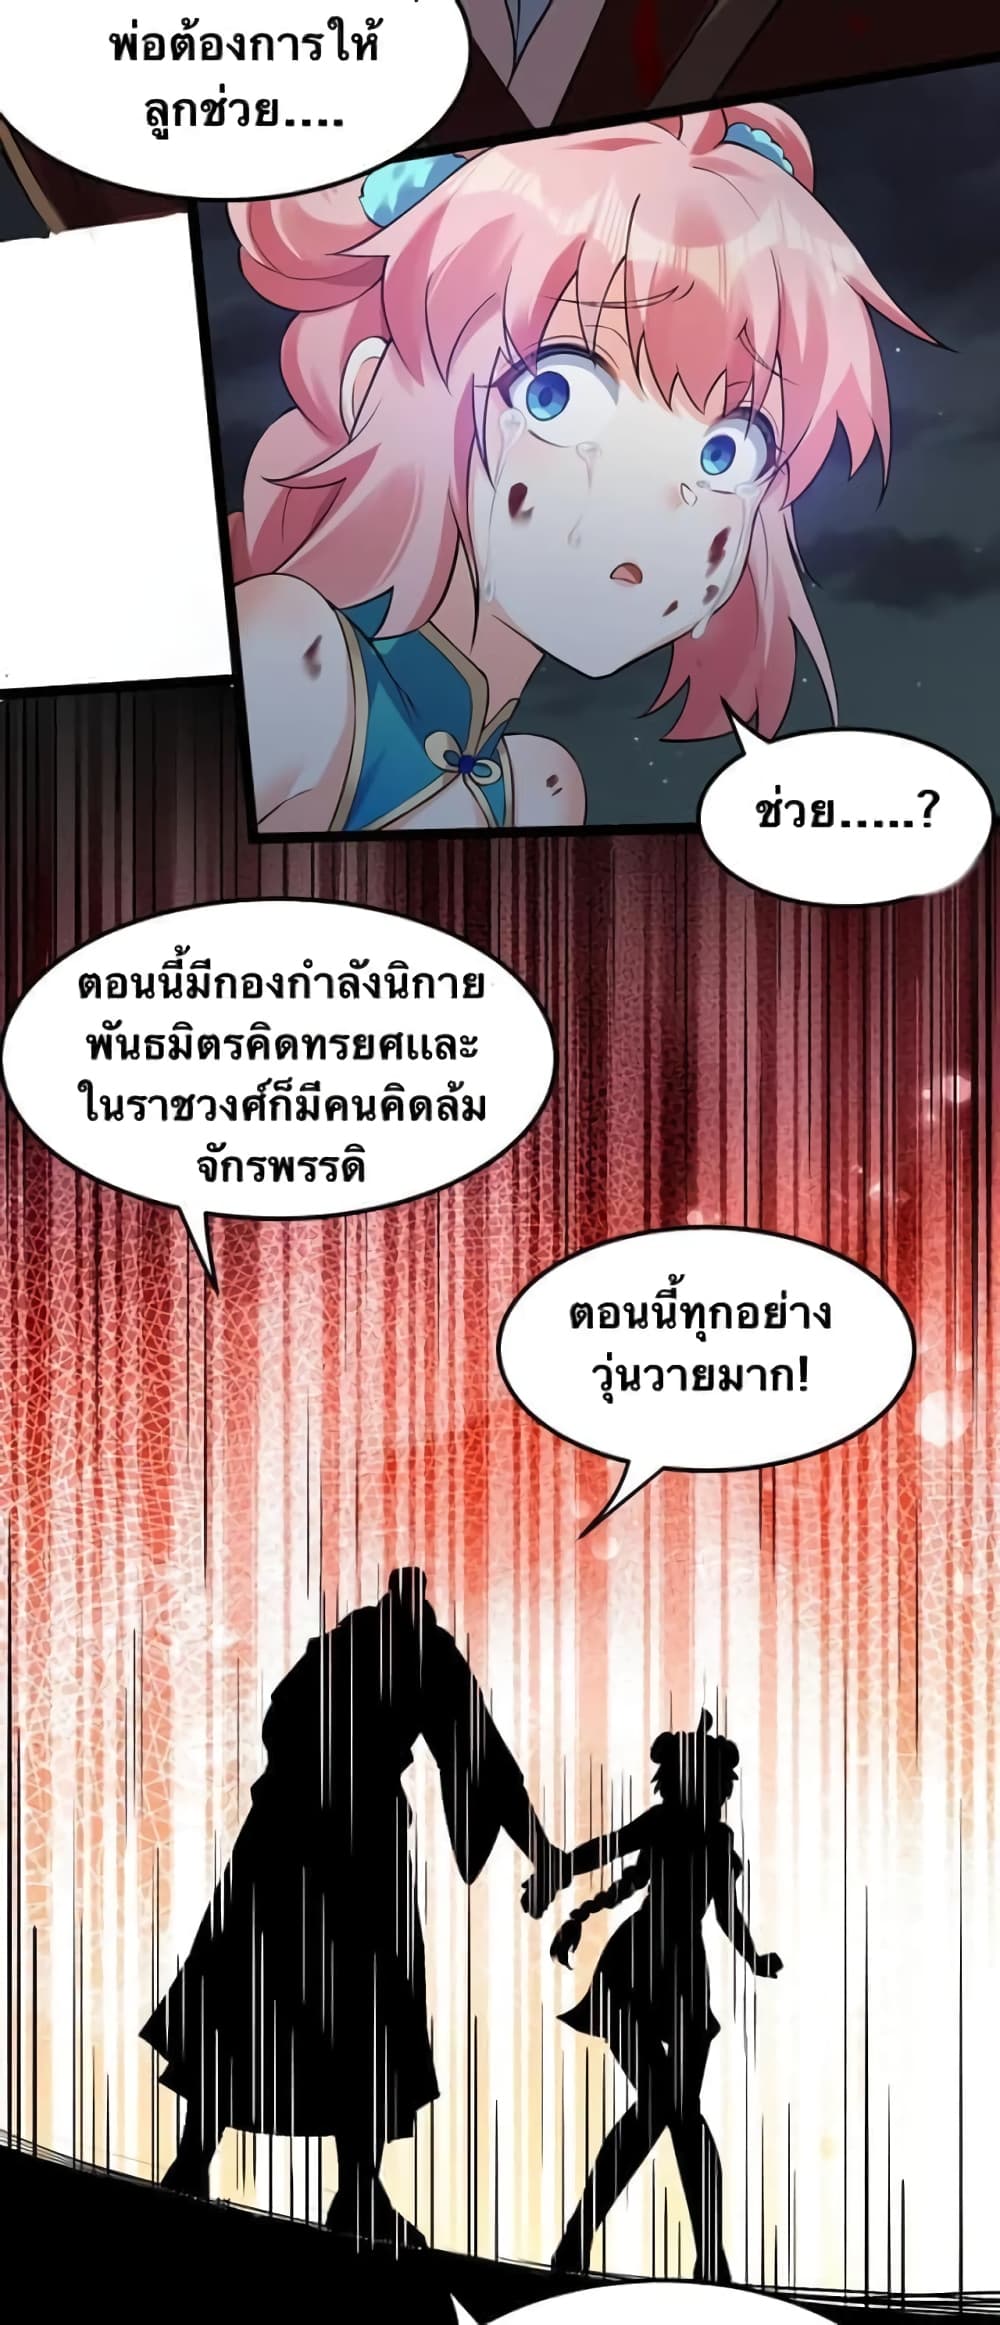 Godsian Masian from Another World ตอนที่ 99 (11)